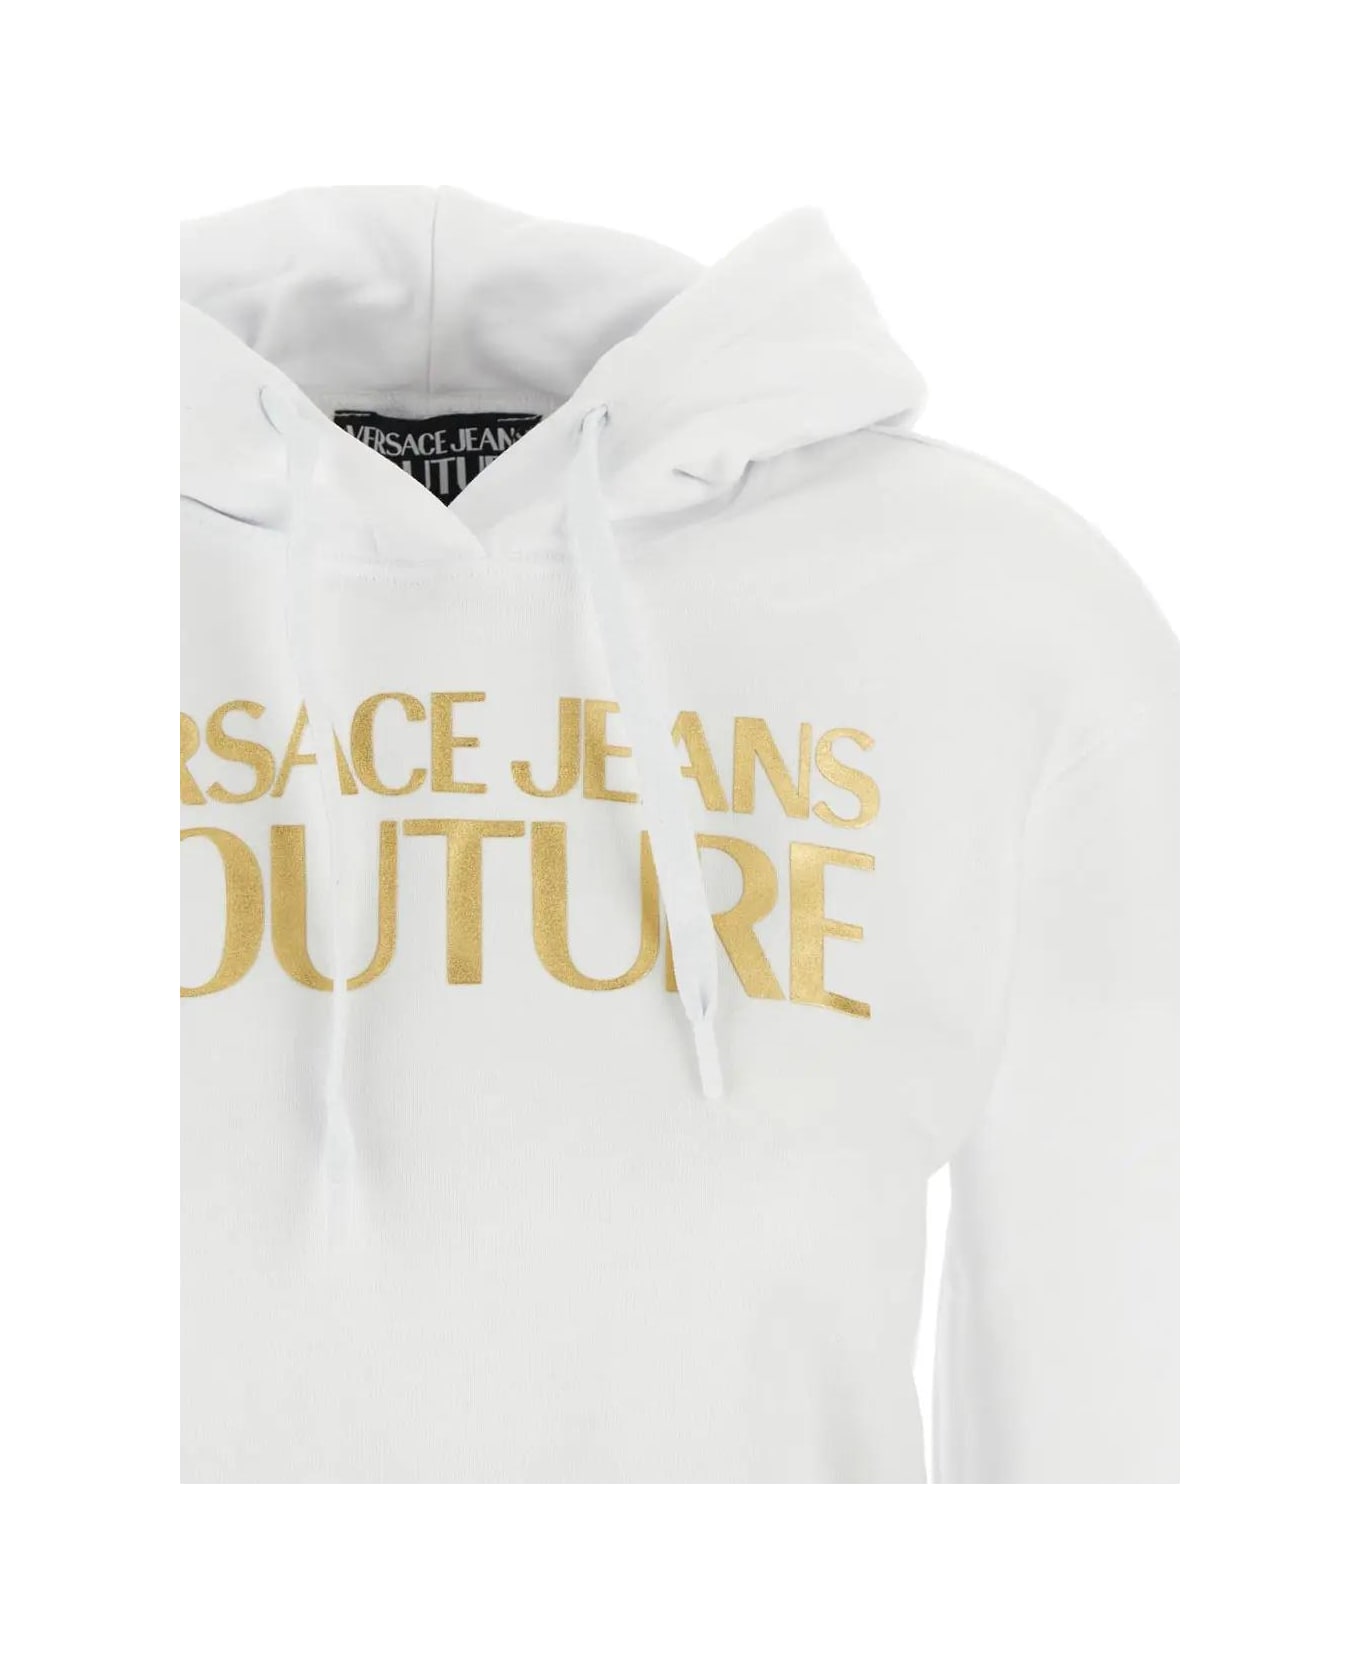 Versace Jeans Couture Logo Hoodie - White フリース